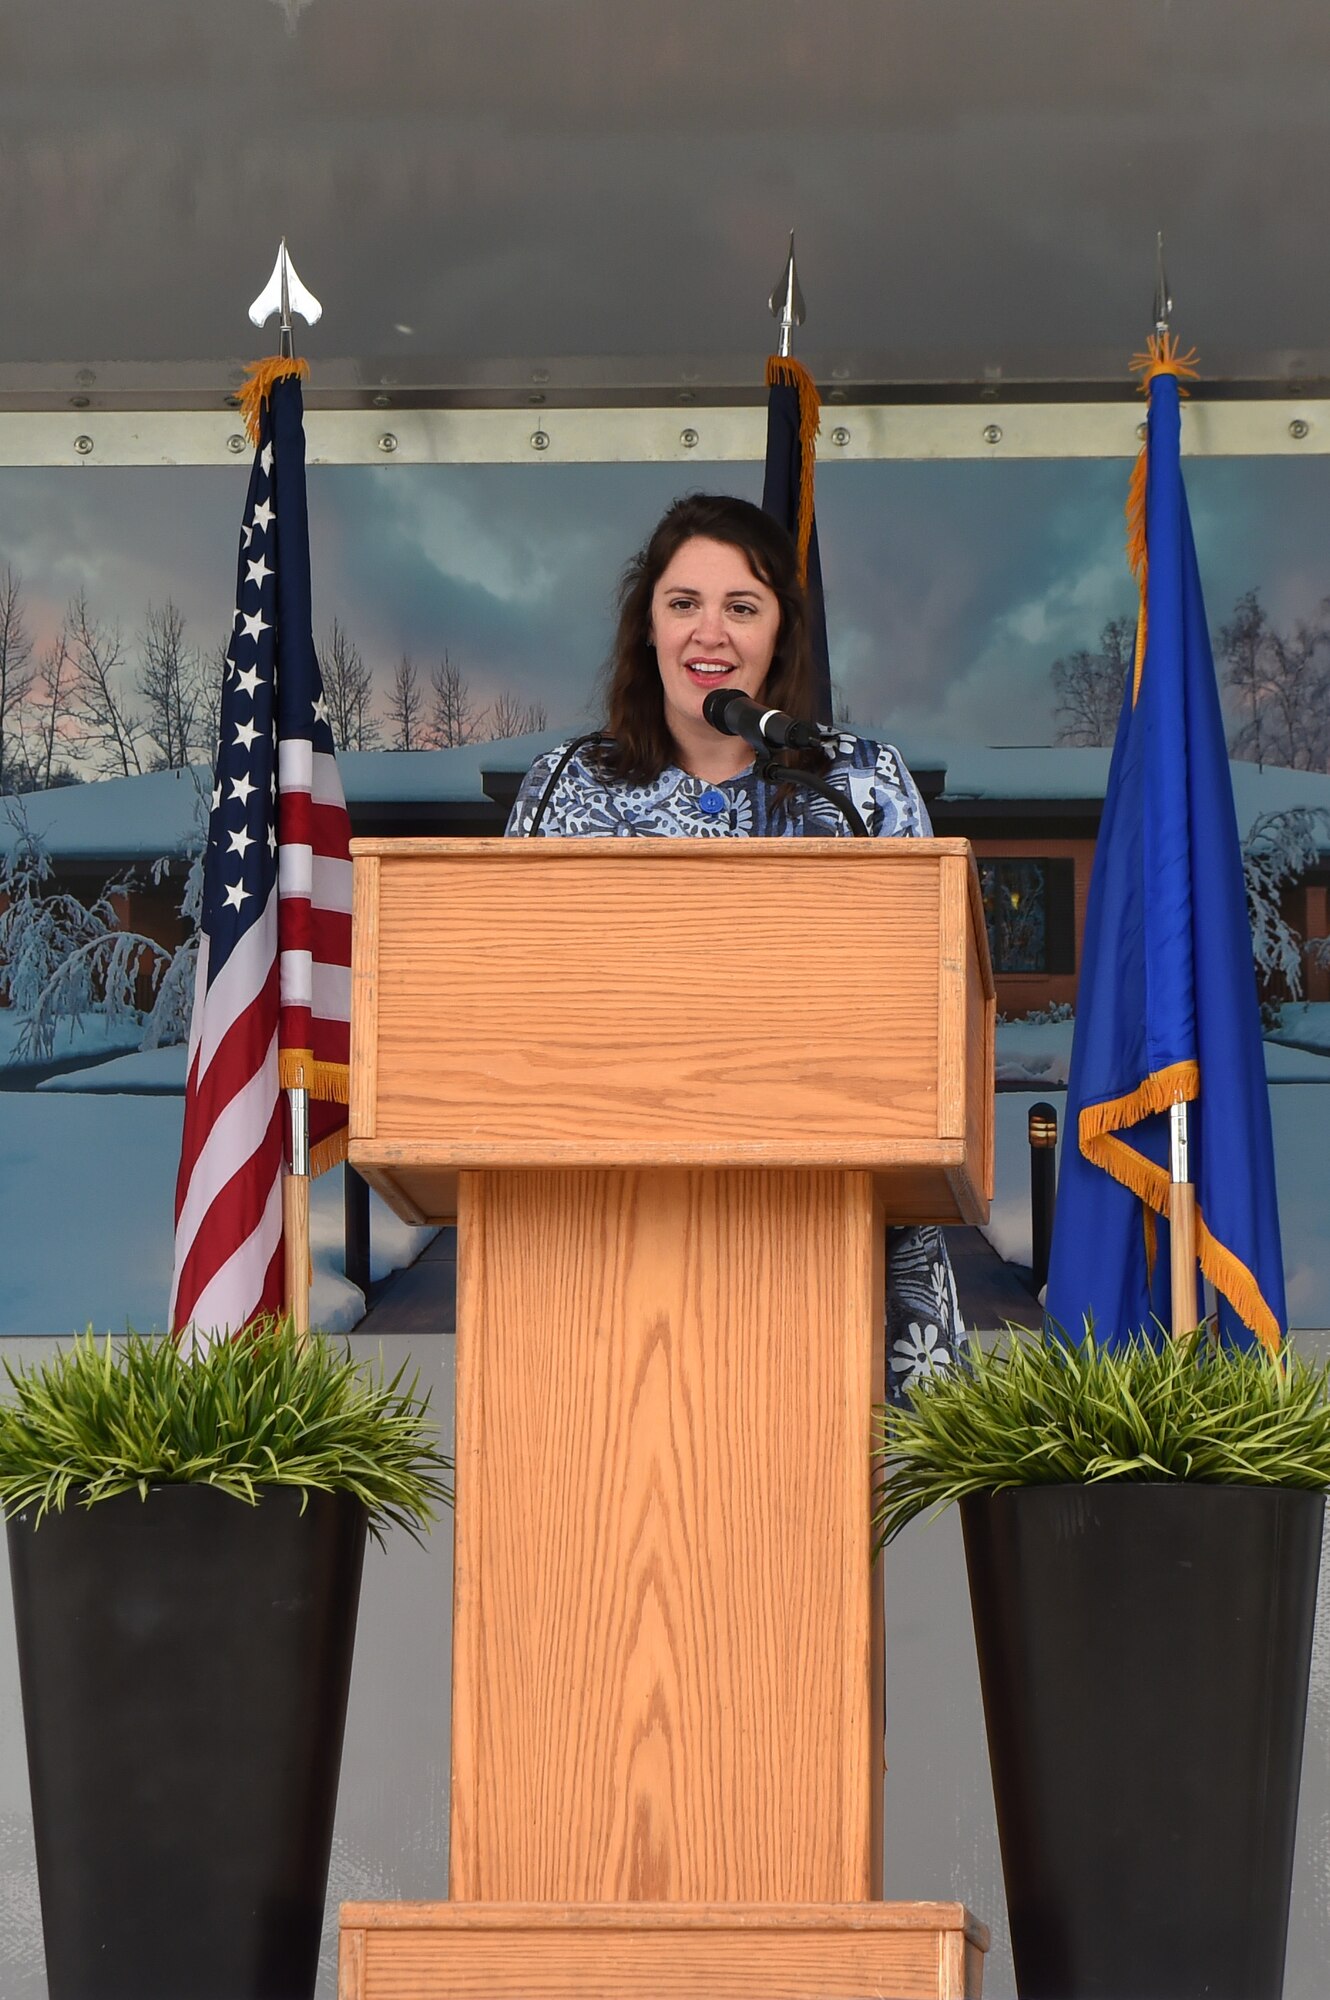 Mary Considine, Chief of Staff, Fisher House Foundation, speaks during the groundbreaking ceremony, June 6, 2017 at Joint Base Elmendorf-Richardson, Alaska. (U.S. Air Force photo by Staff Sgt. Sheila deVera)